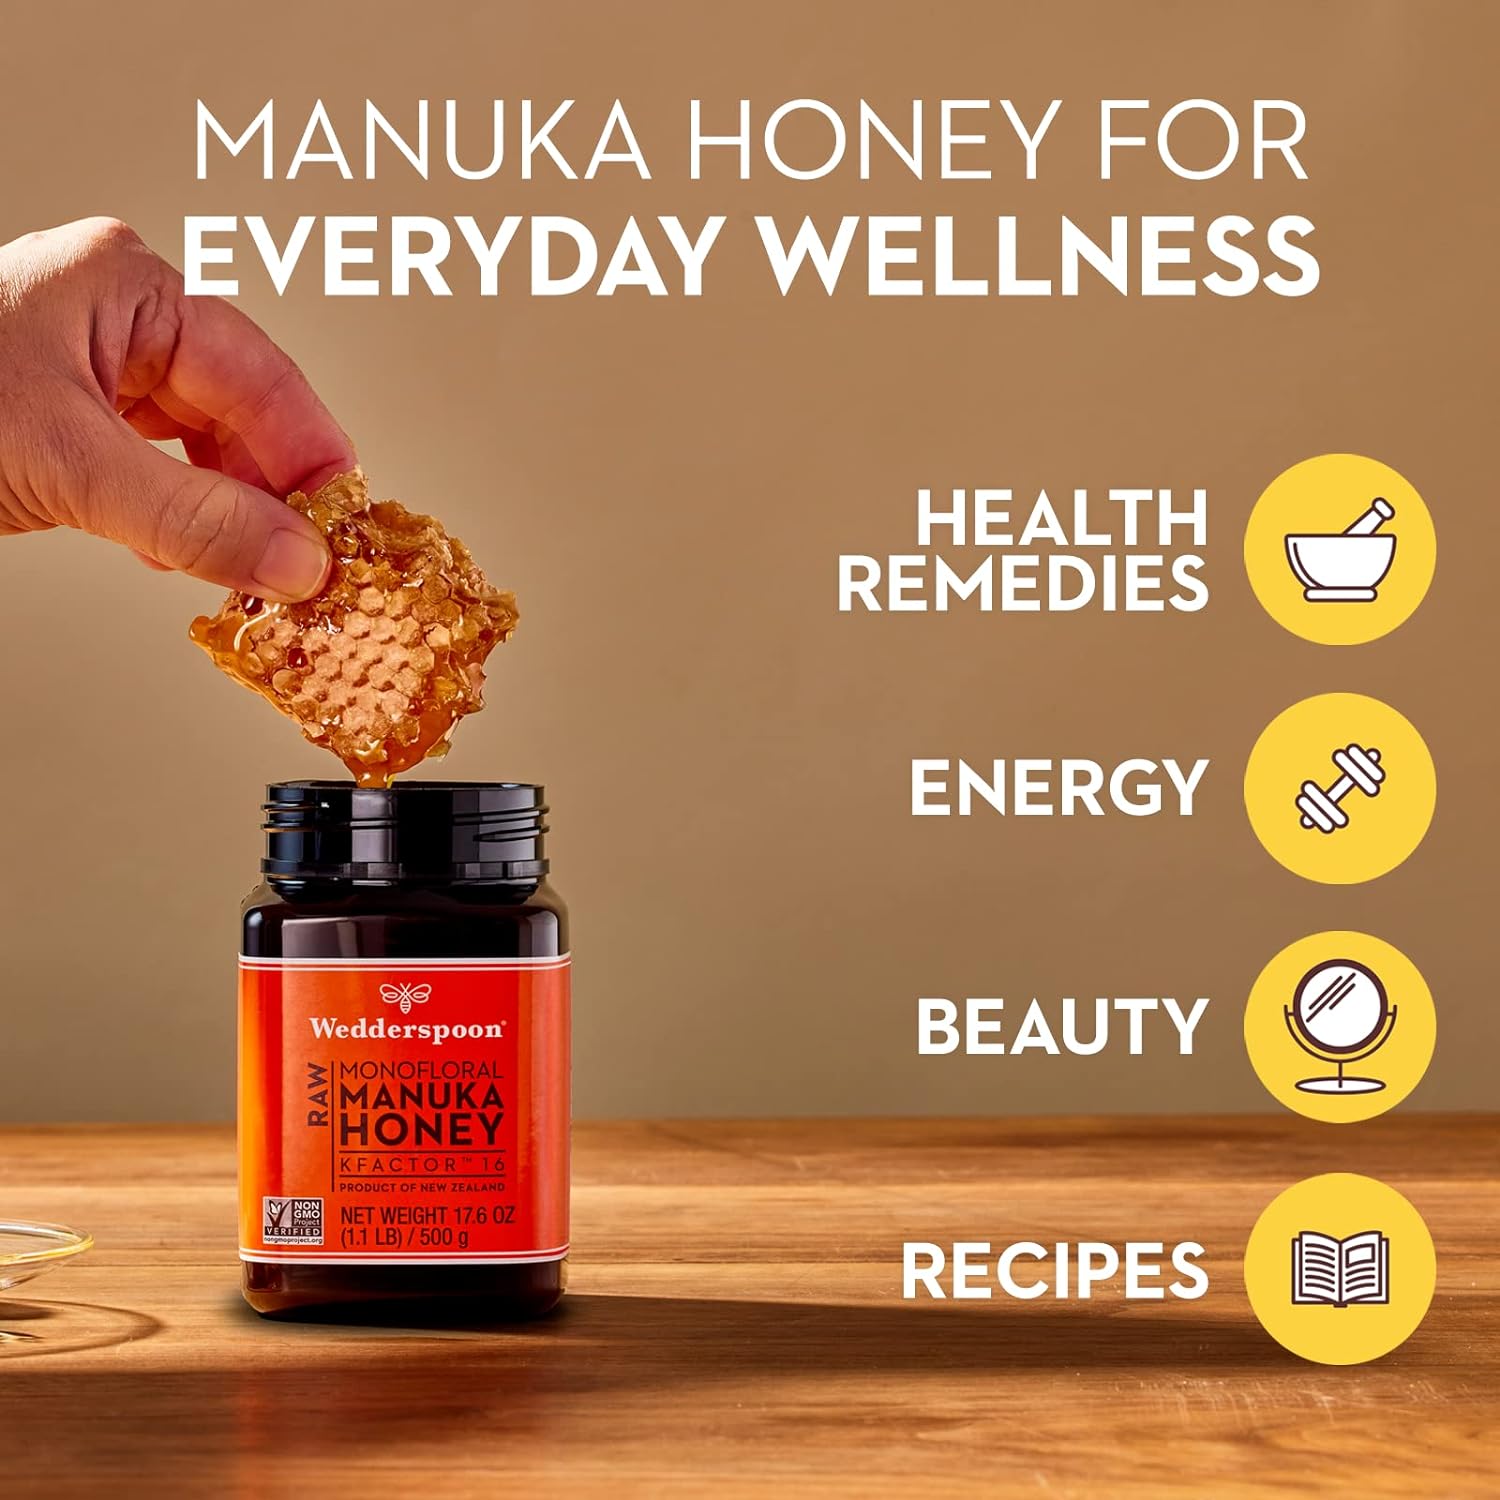 Wedderspoon Raw Premium Manuka Honey, KFactor 16, 17.6 Oz, Unpasteurized, Genuine New Zealand Honey, Traceable from Our Hives to Your Home : Grocery & Gourmet Food